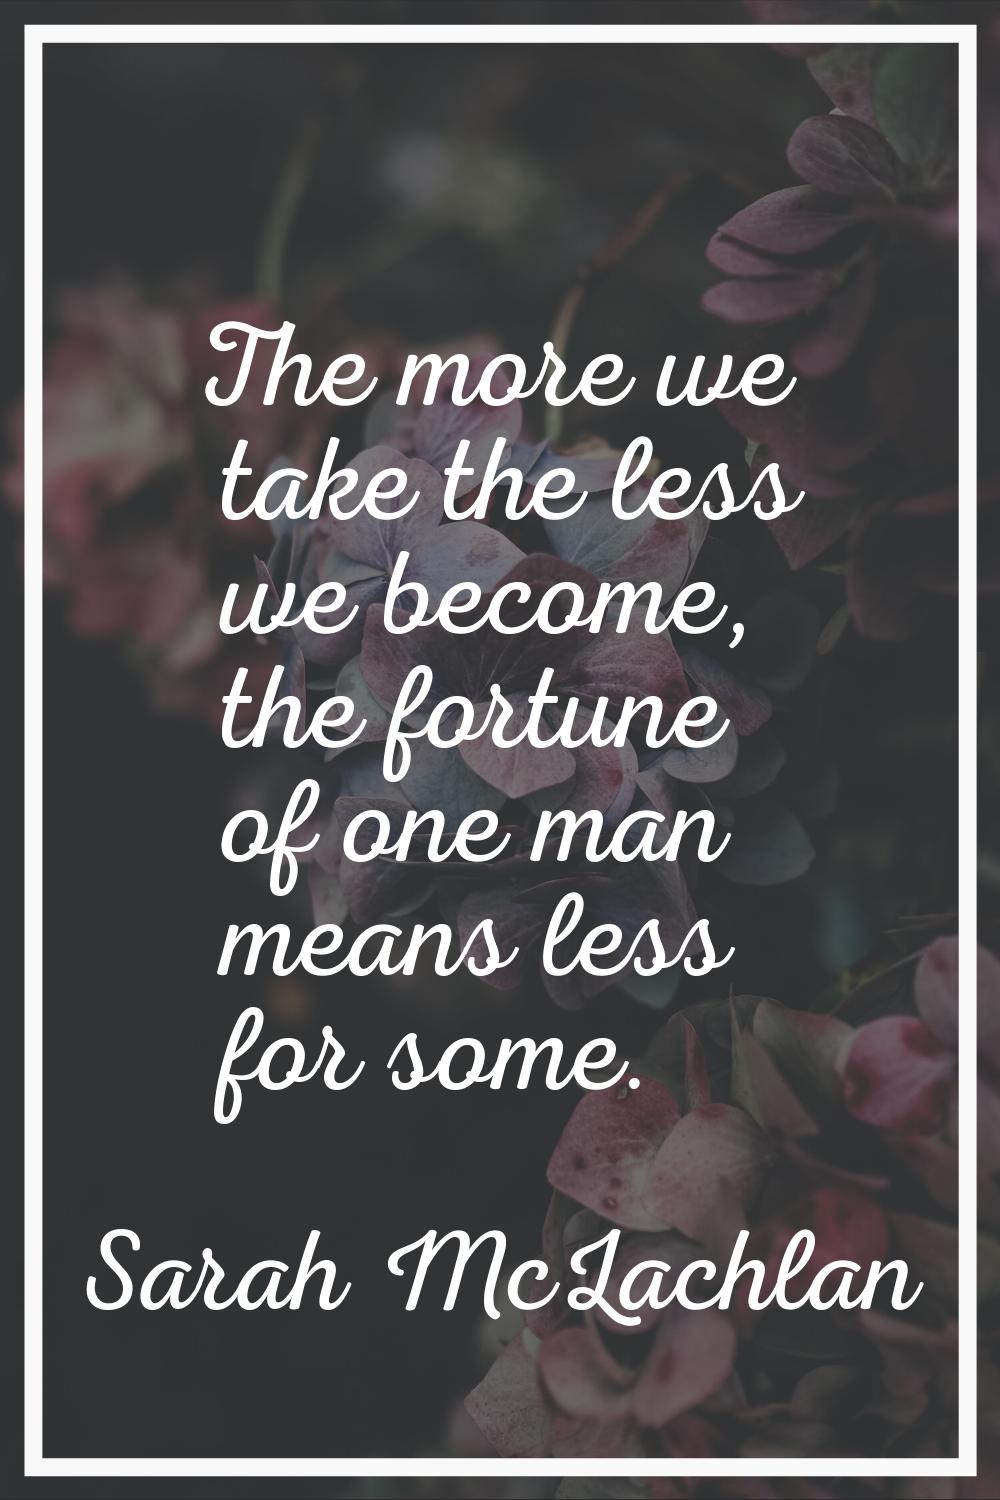 The more we take the less we become, the fortune of one man means less for some.